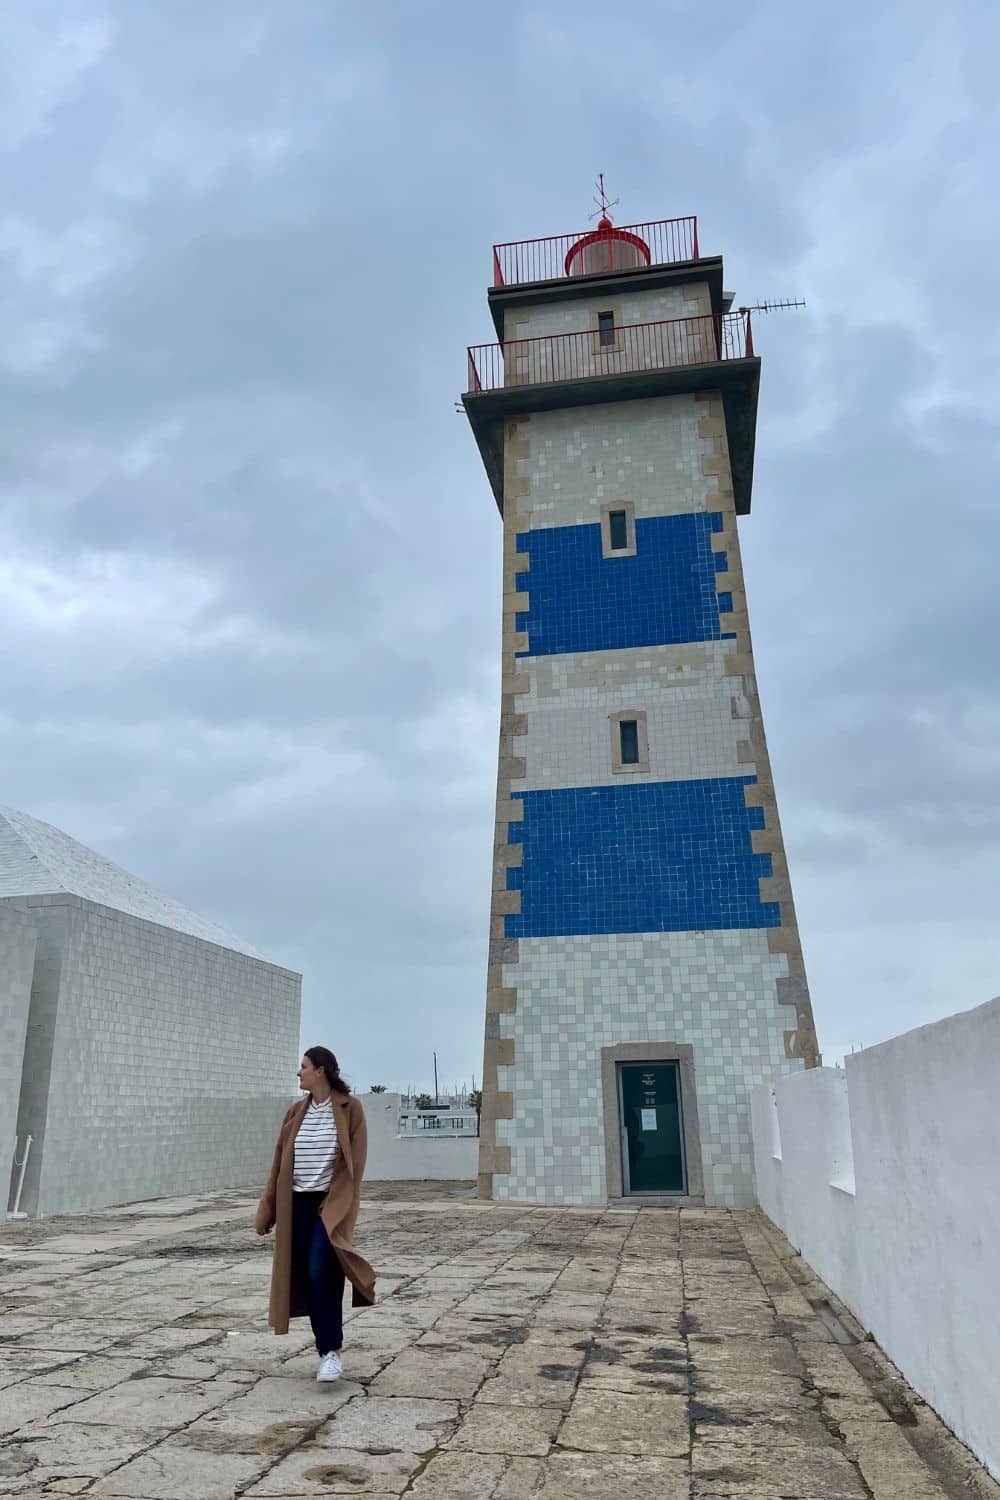 A woman alone with a lighthouse in the background.